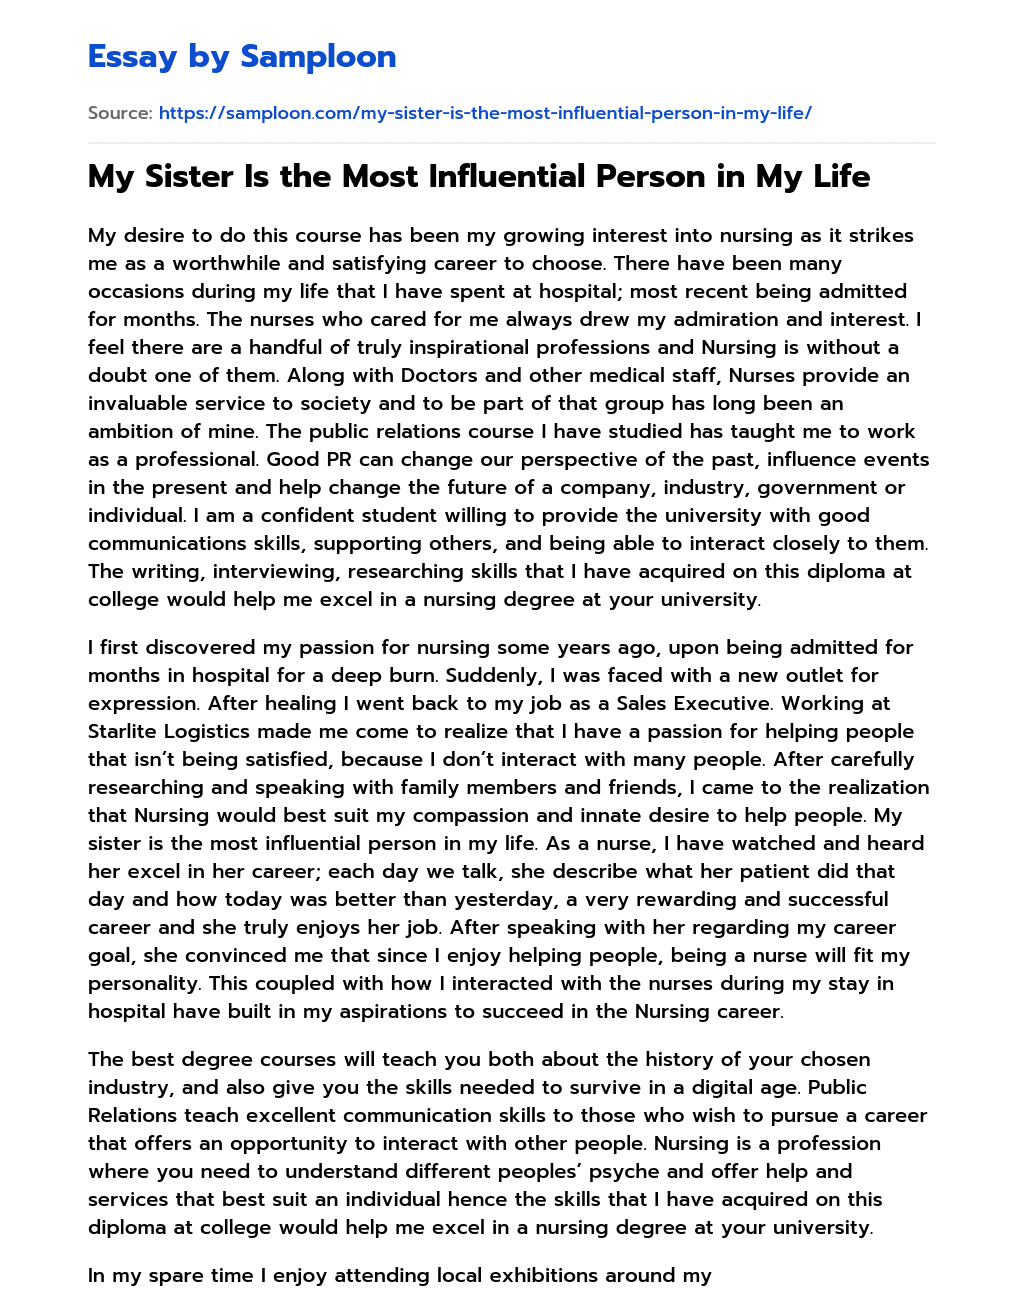 My Sister Is the Most Influential Person in My Life essay